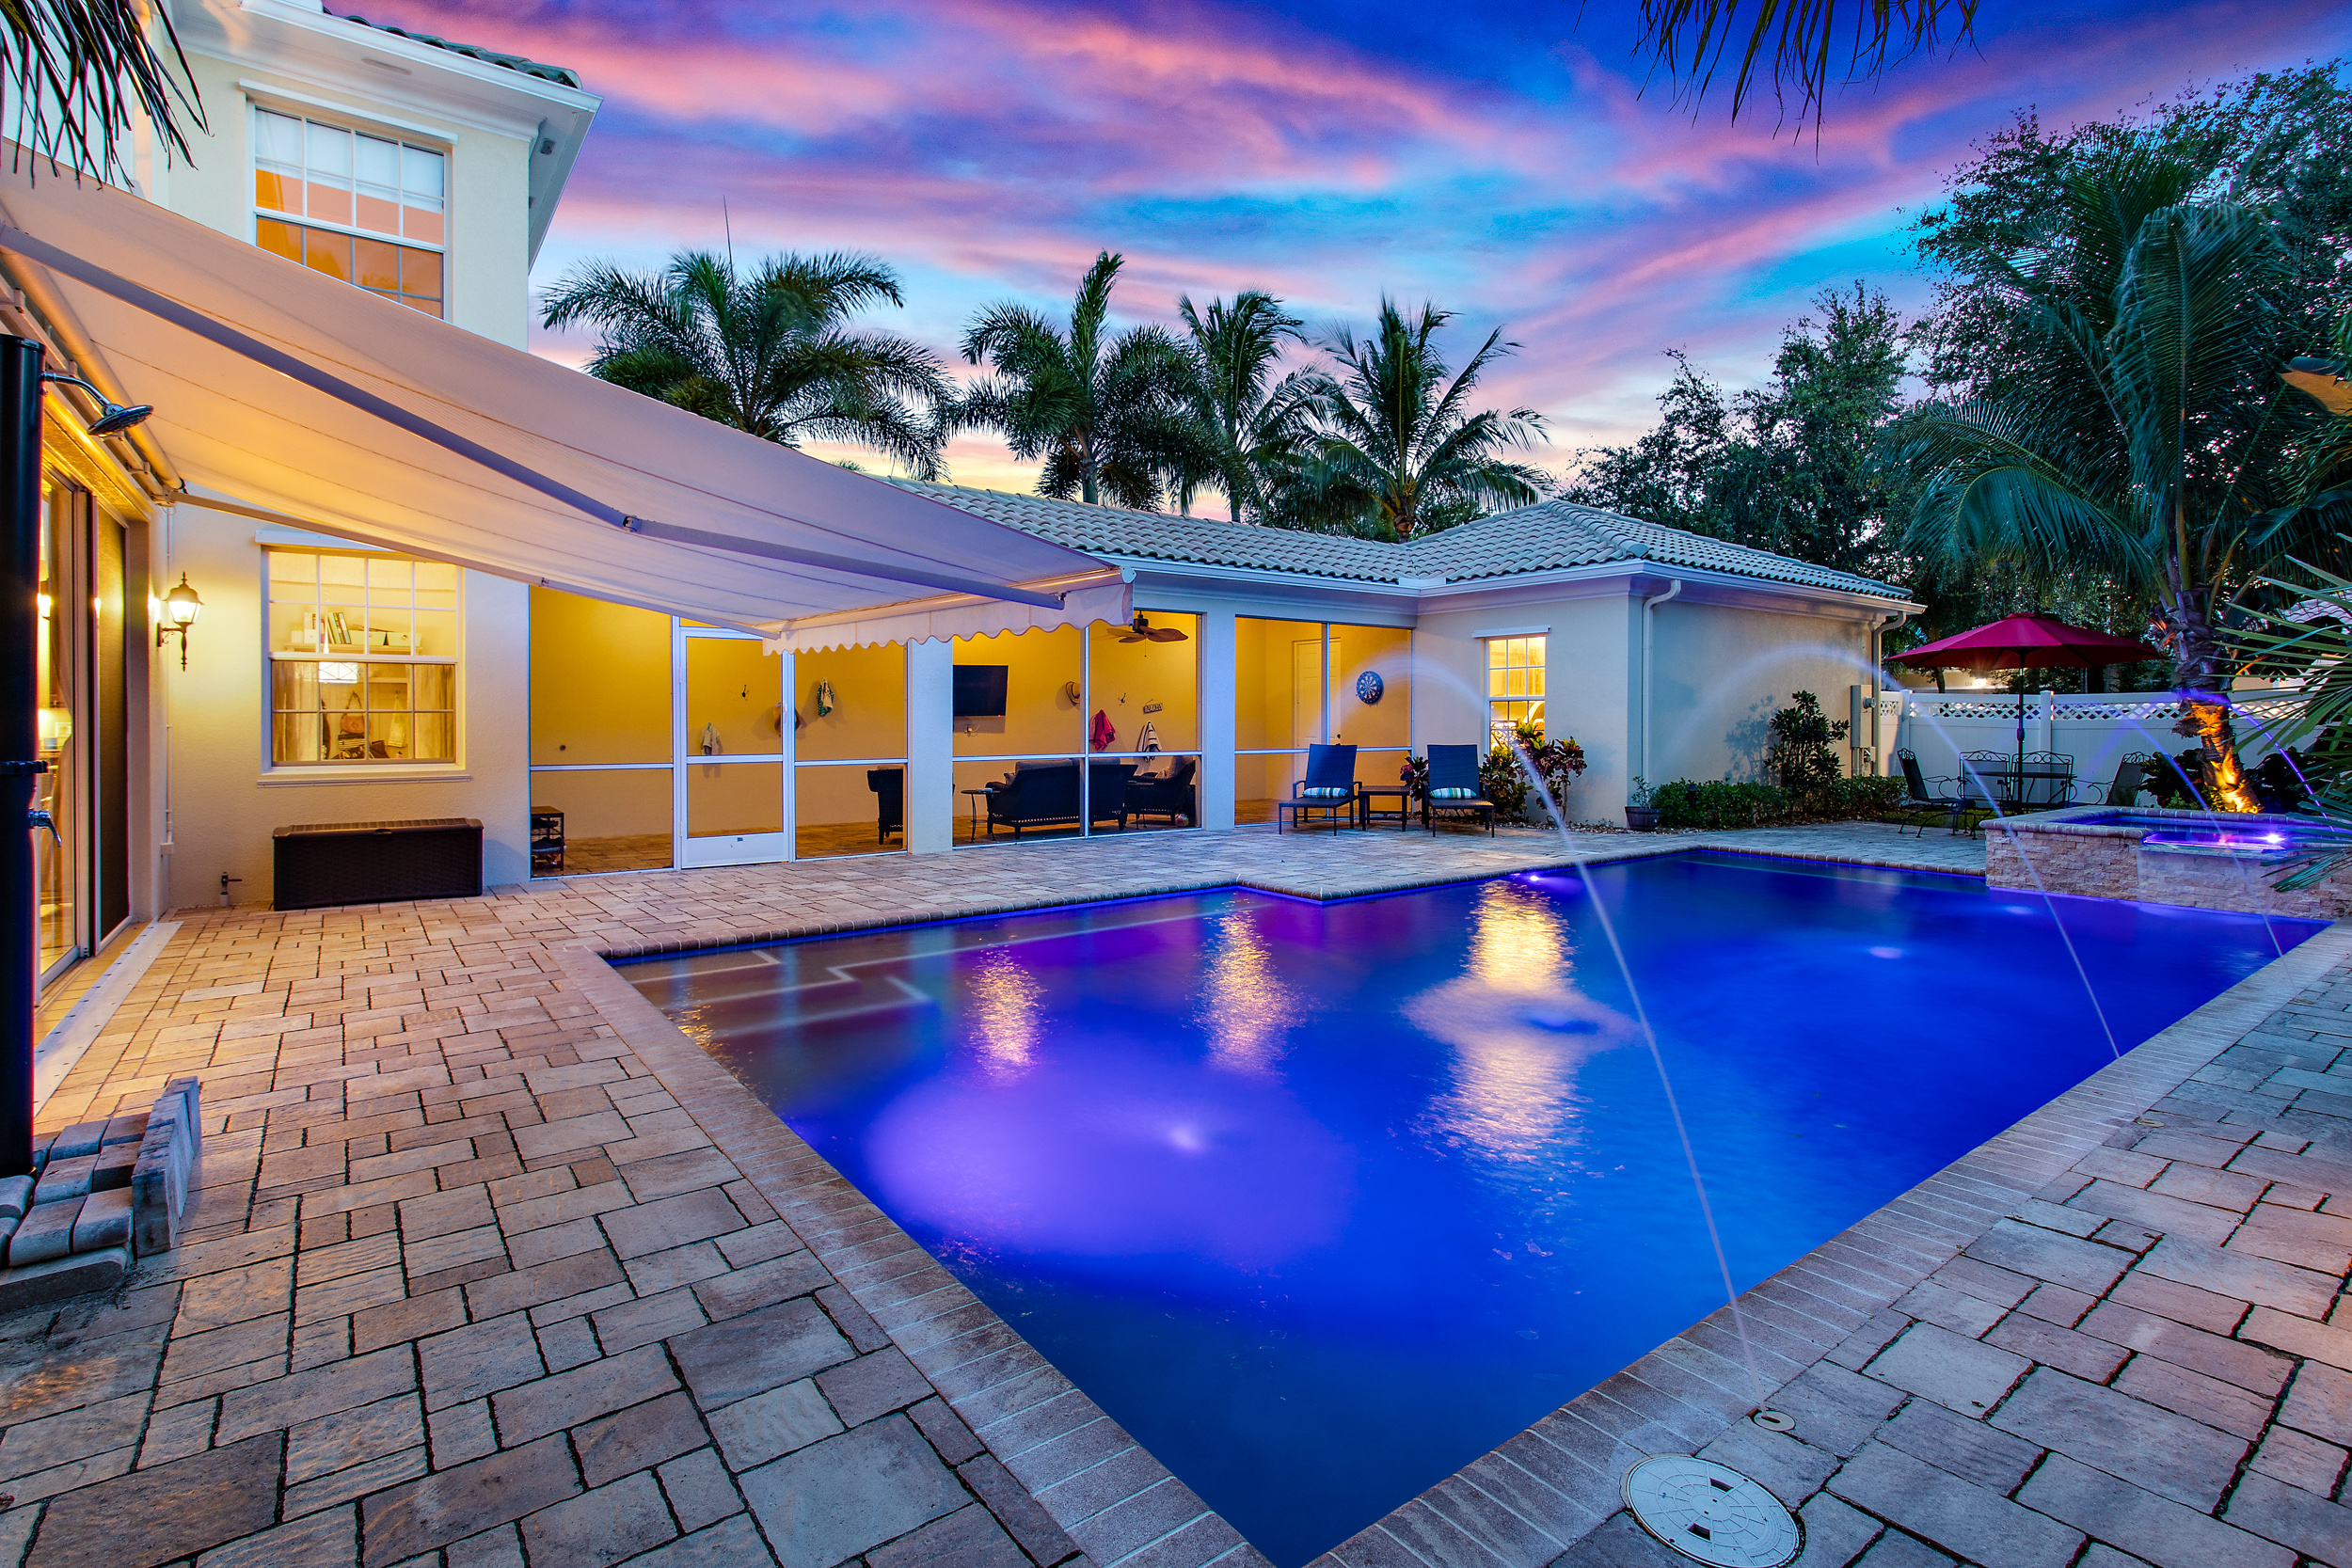 Tuscany at Abacoa in Jupiter Home For Sale presented by Meyer Lucas Real Estate